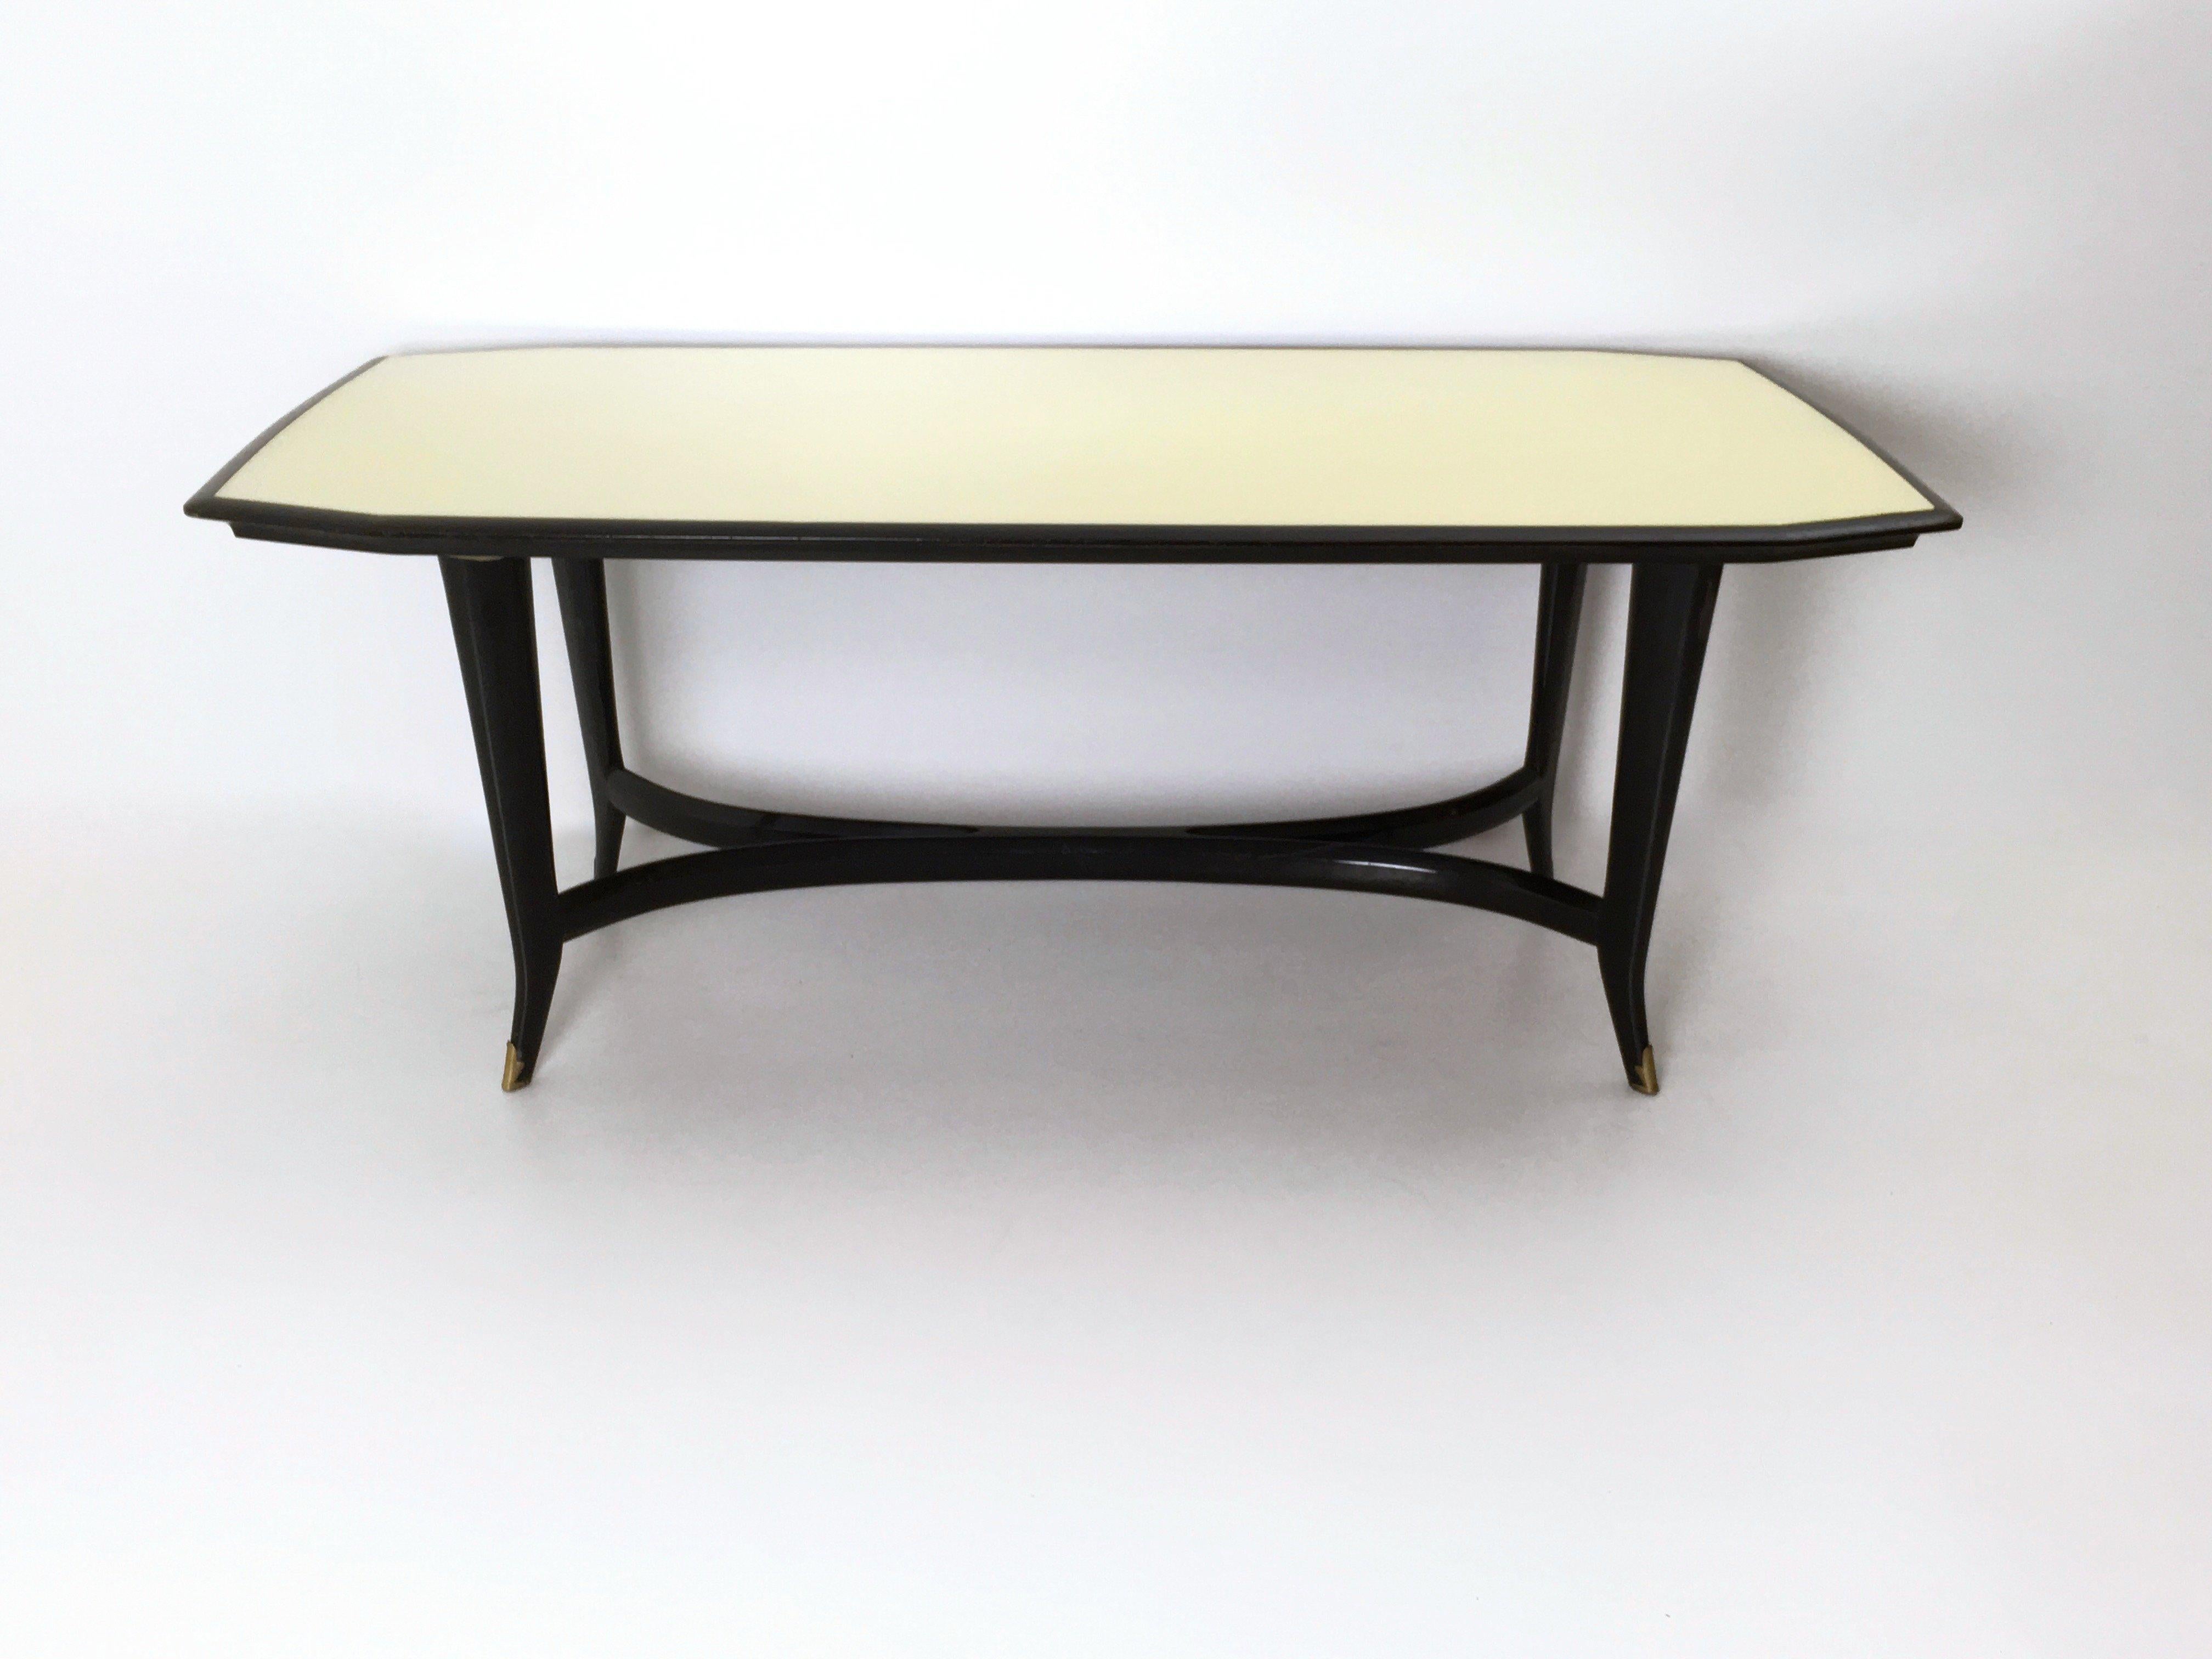 1950s.
It is made in ebonized beech and features a back-painted glass top and brass feet caps. 
It may show slight traces of use since it's vintage, but it can be considered as in excellent original condition and ready to become a piece in a